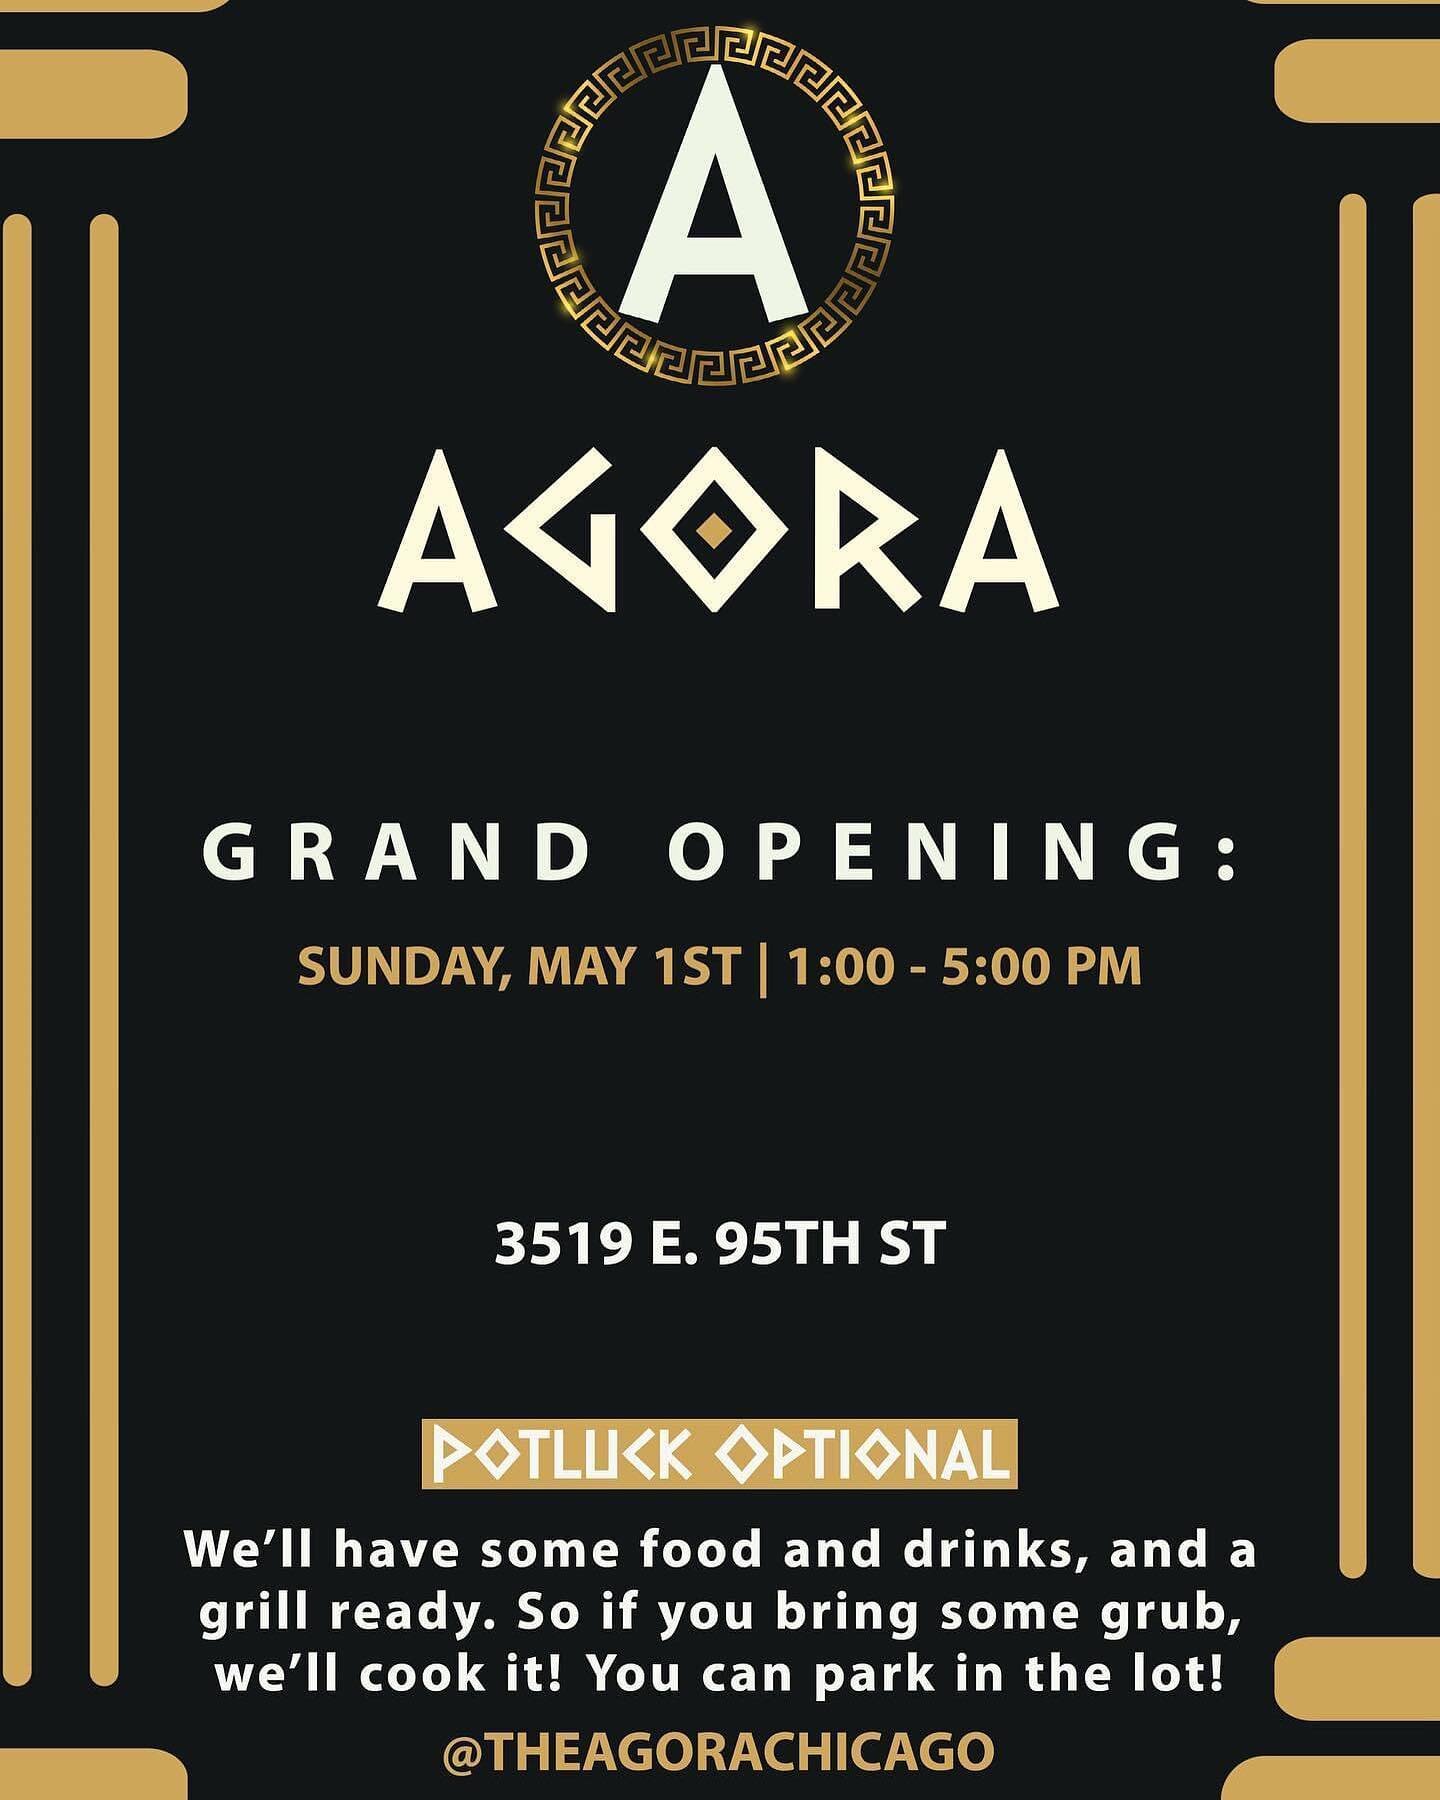 Stop by the grand opening of @theagorachicago. There will be free headshots! 

Sunday 1-5pm. 3519 E 95th St. 60617.

There will also be music and a grill! It&rsquo;s a potluck. So stop by and spread the word! 

@stevenjwalsh @wealth.thru.realestate